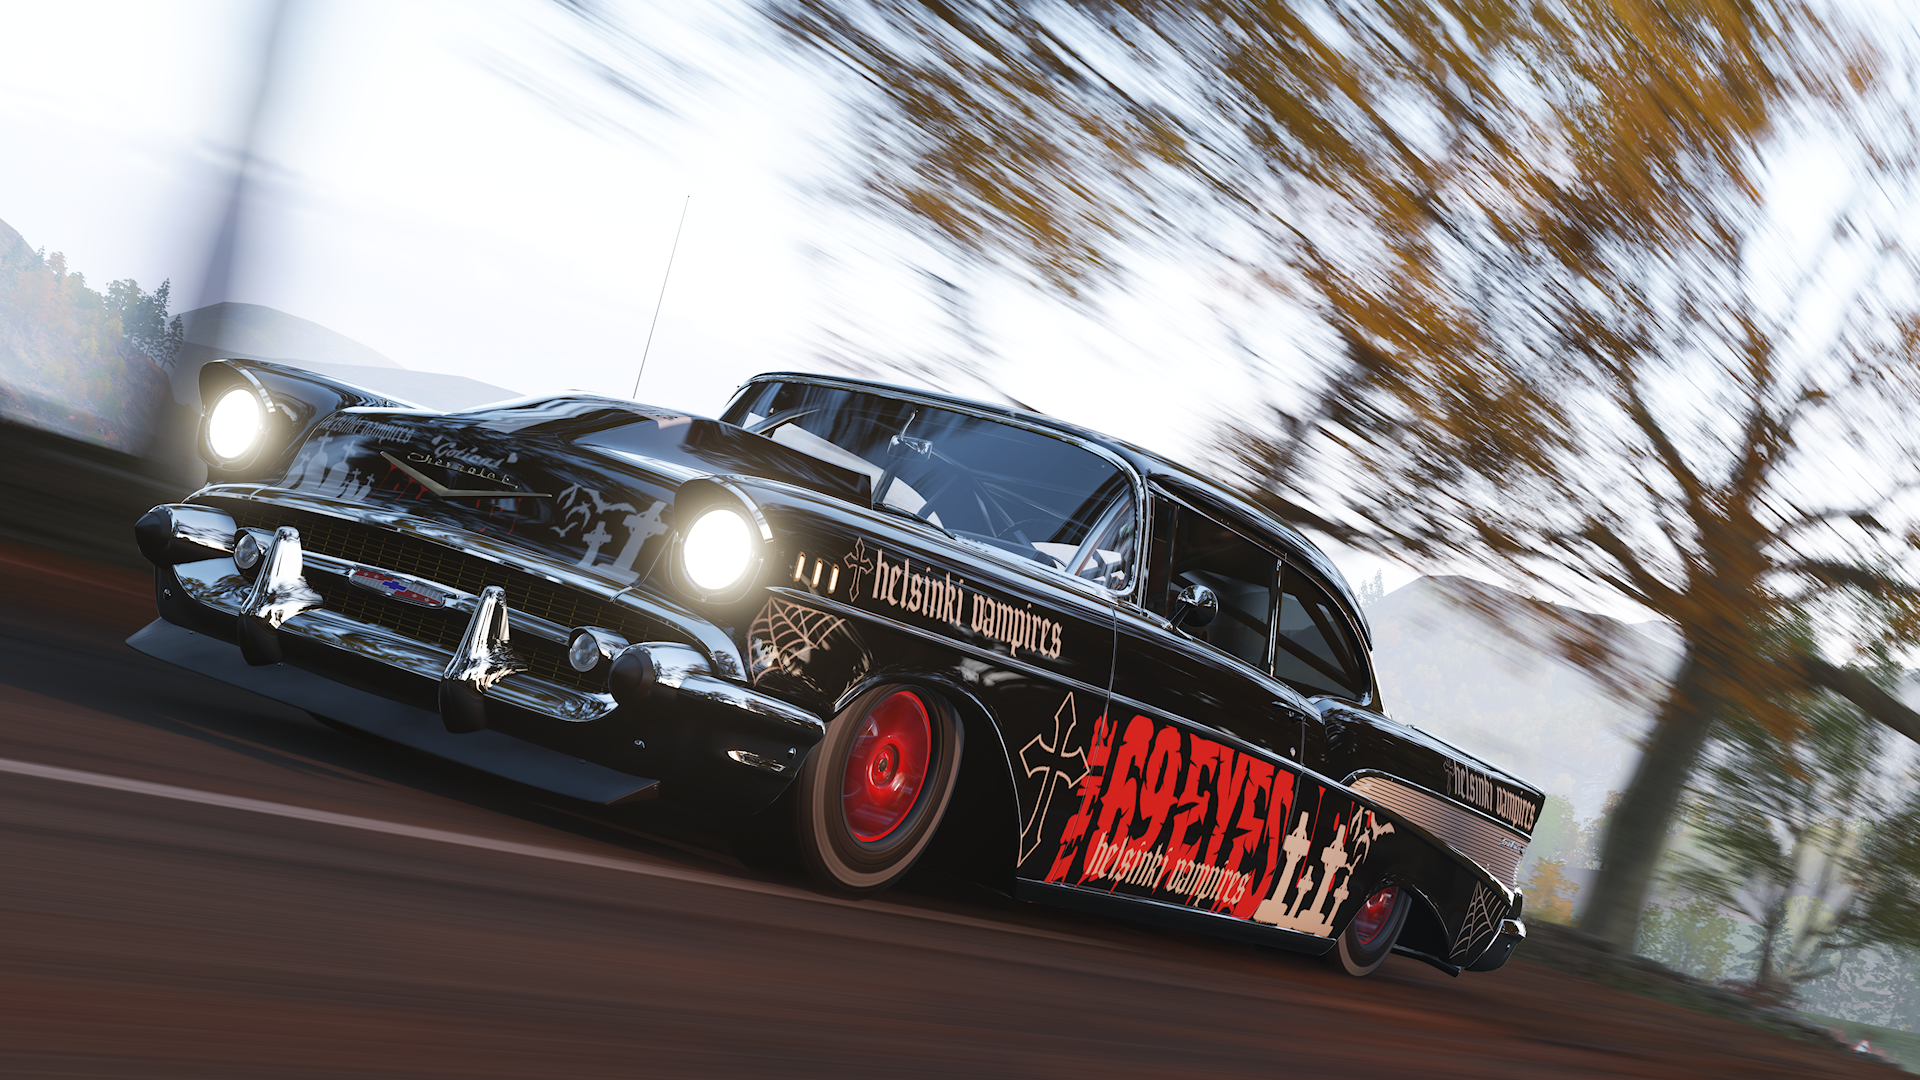 General 1920x1080 Forza Horizon 4 blurry background race tracks Chevrolet Xbox Game Studios car vehicle PlaygroundGames blurred Chevrolet Bel Air Turn 10 Studios trees American cars driving The 69 eyes headlights frontal view video games video game art CGI